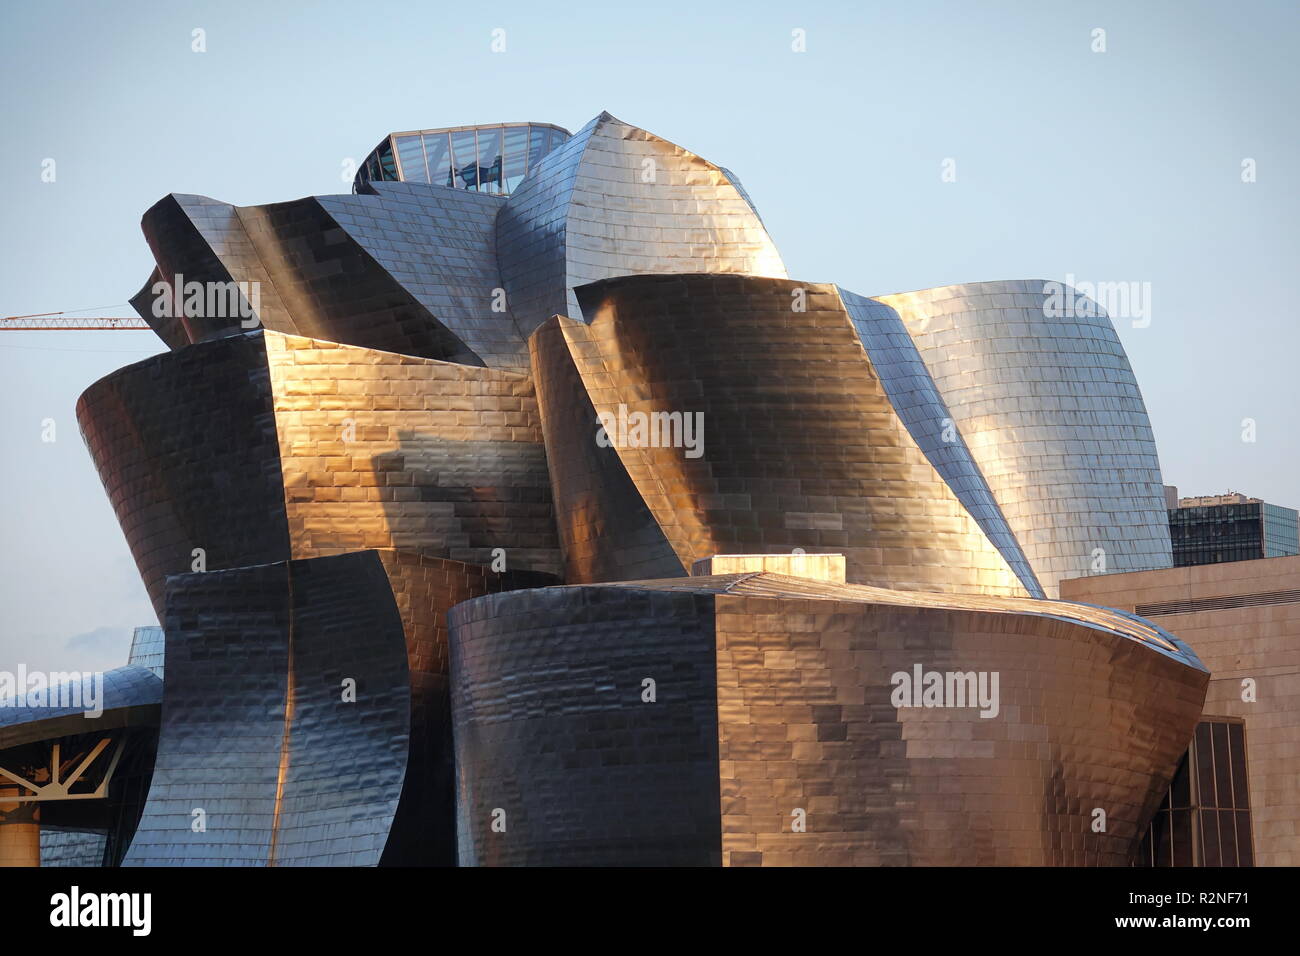 BILBAO, SPAIN -August 2018- Exterior view of the Guggenheim Museum Bilbao, a modern and contemporary art museum designed by famous architect Frank Geh Stock Photo